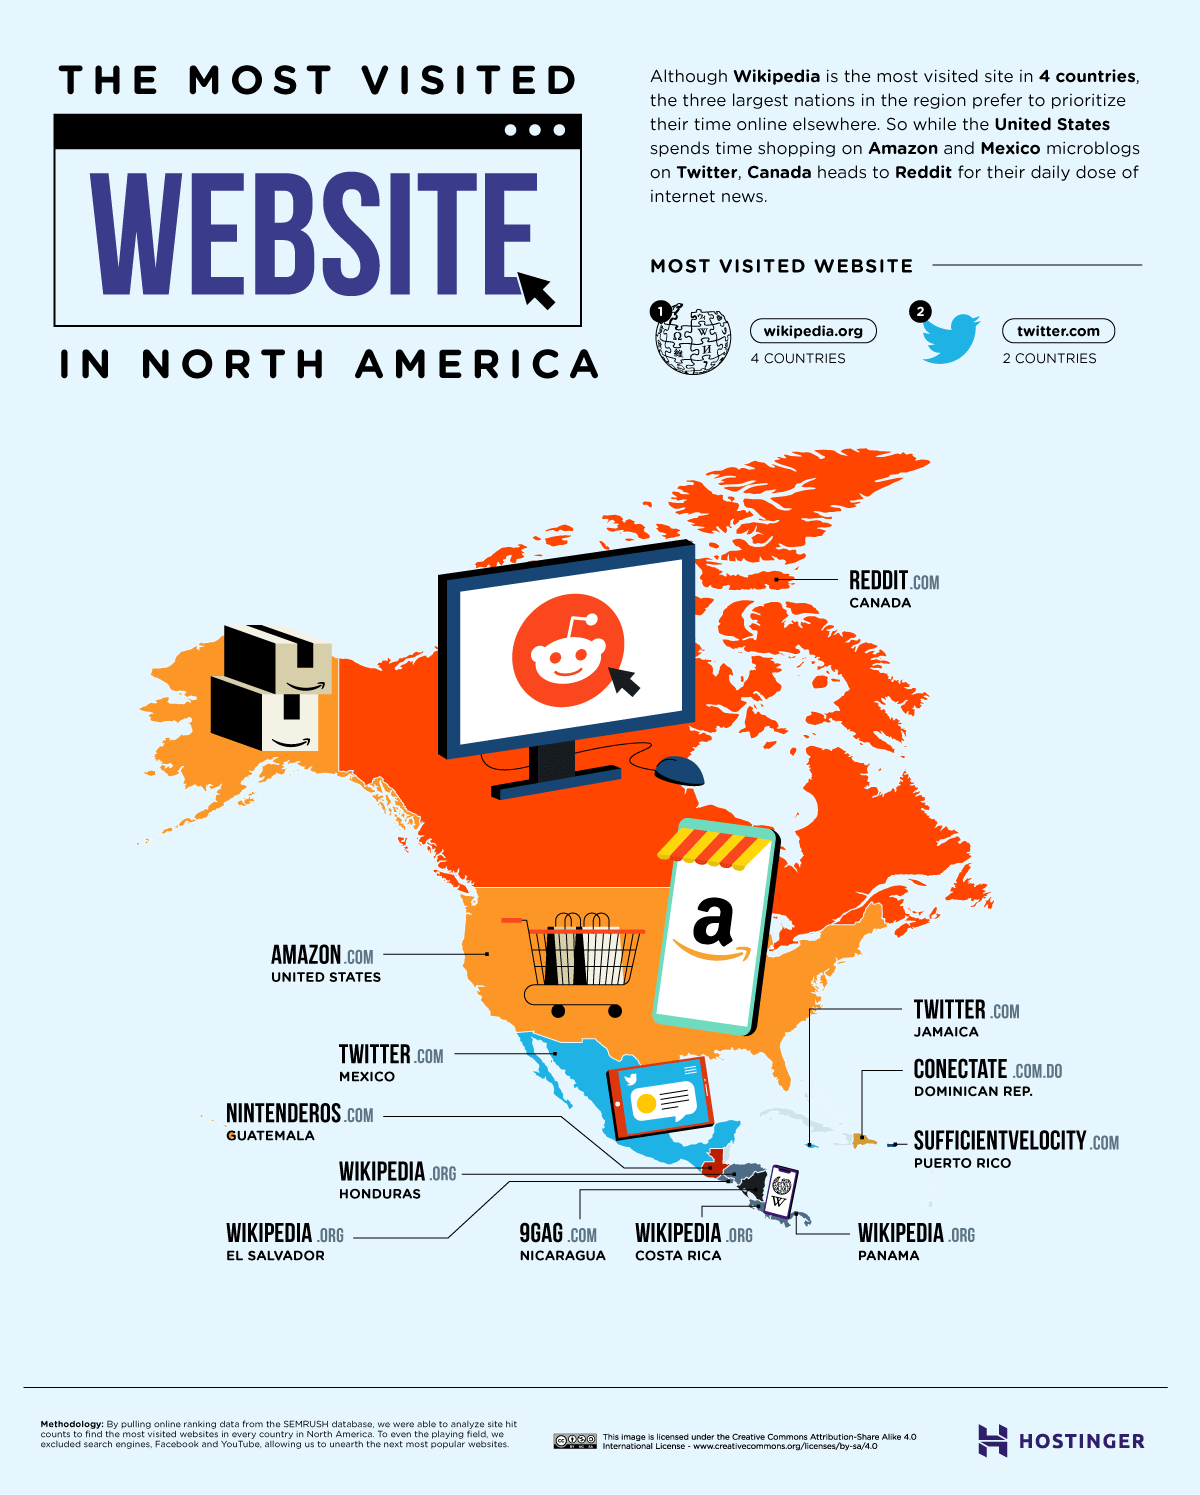 Image showing the most visited websites in North America